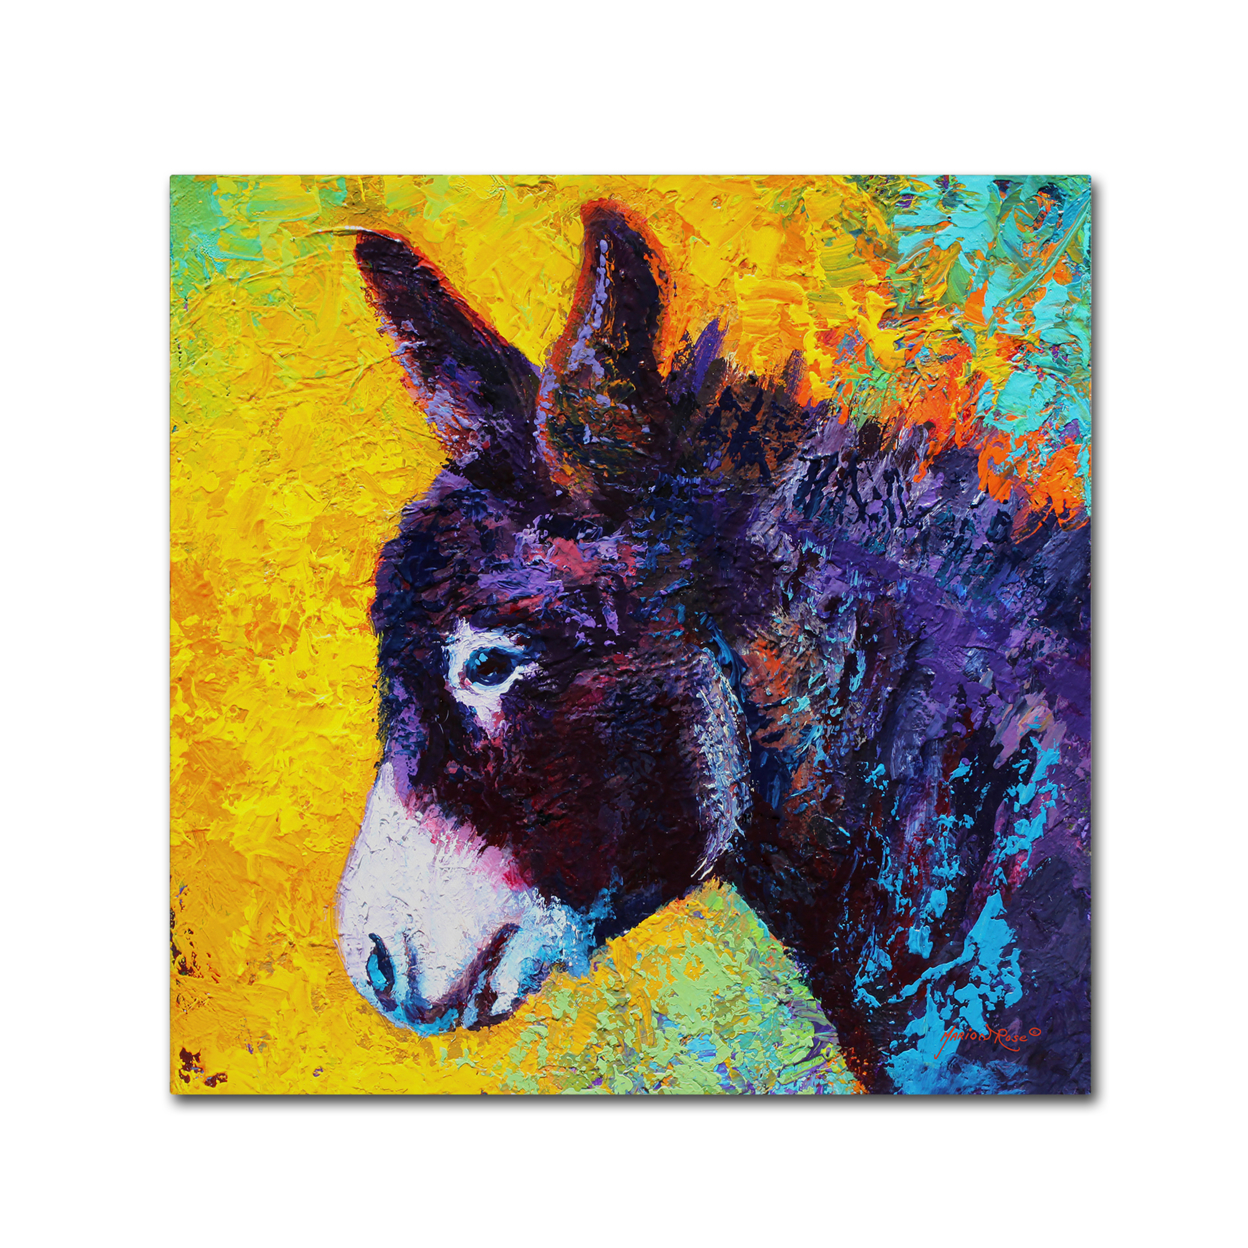 Marion Rose 'Donkey Sparky' Ready To Hang Canvas Art 24 X 24 Inches Made In USA